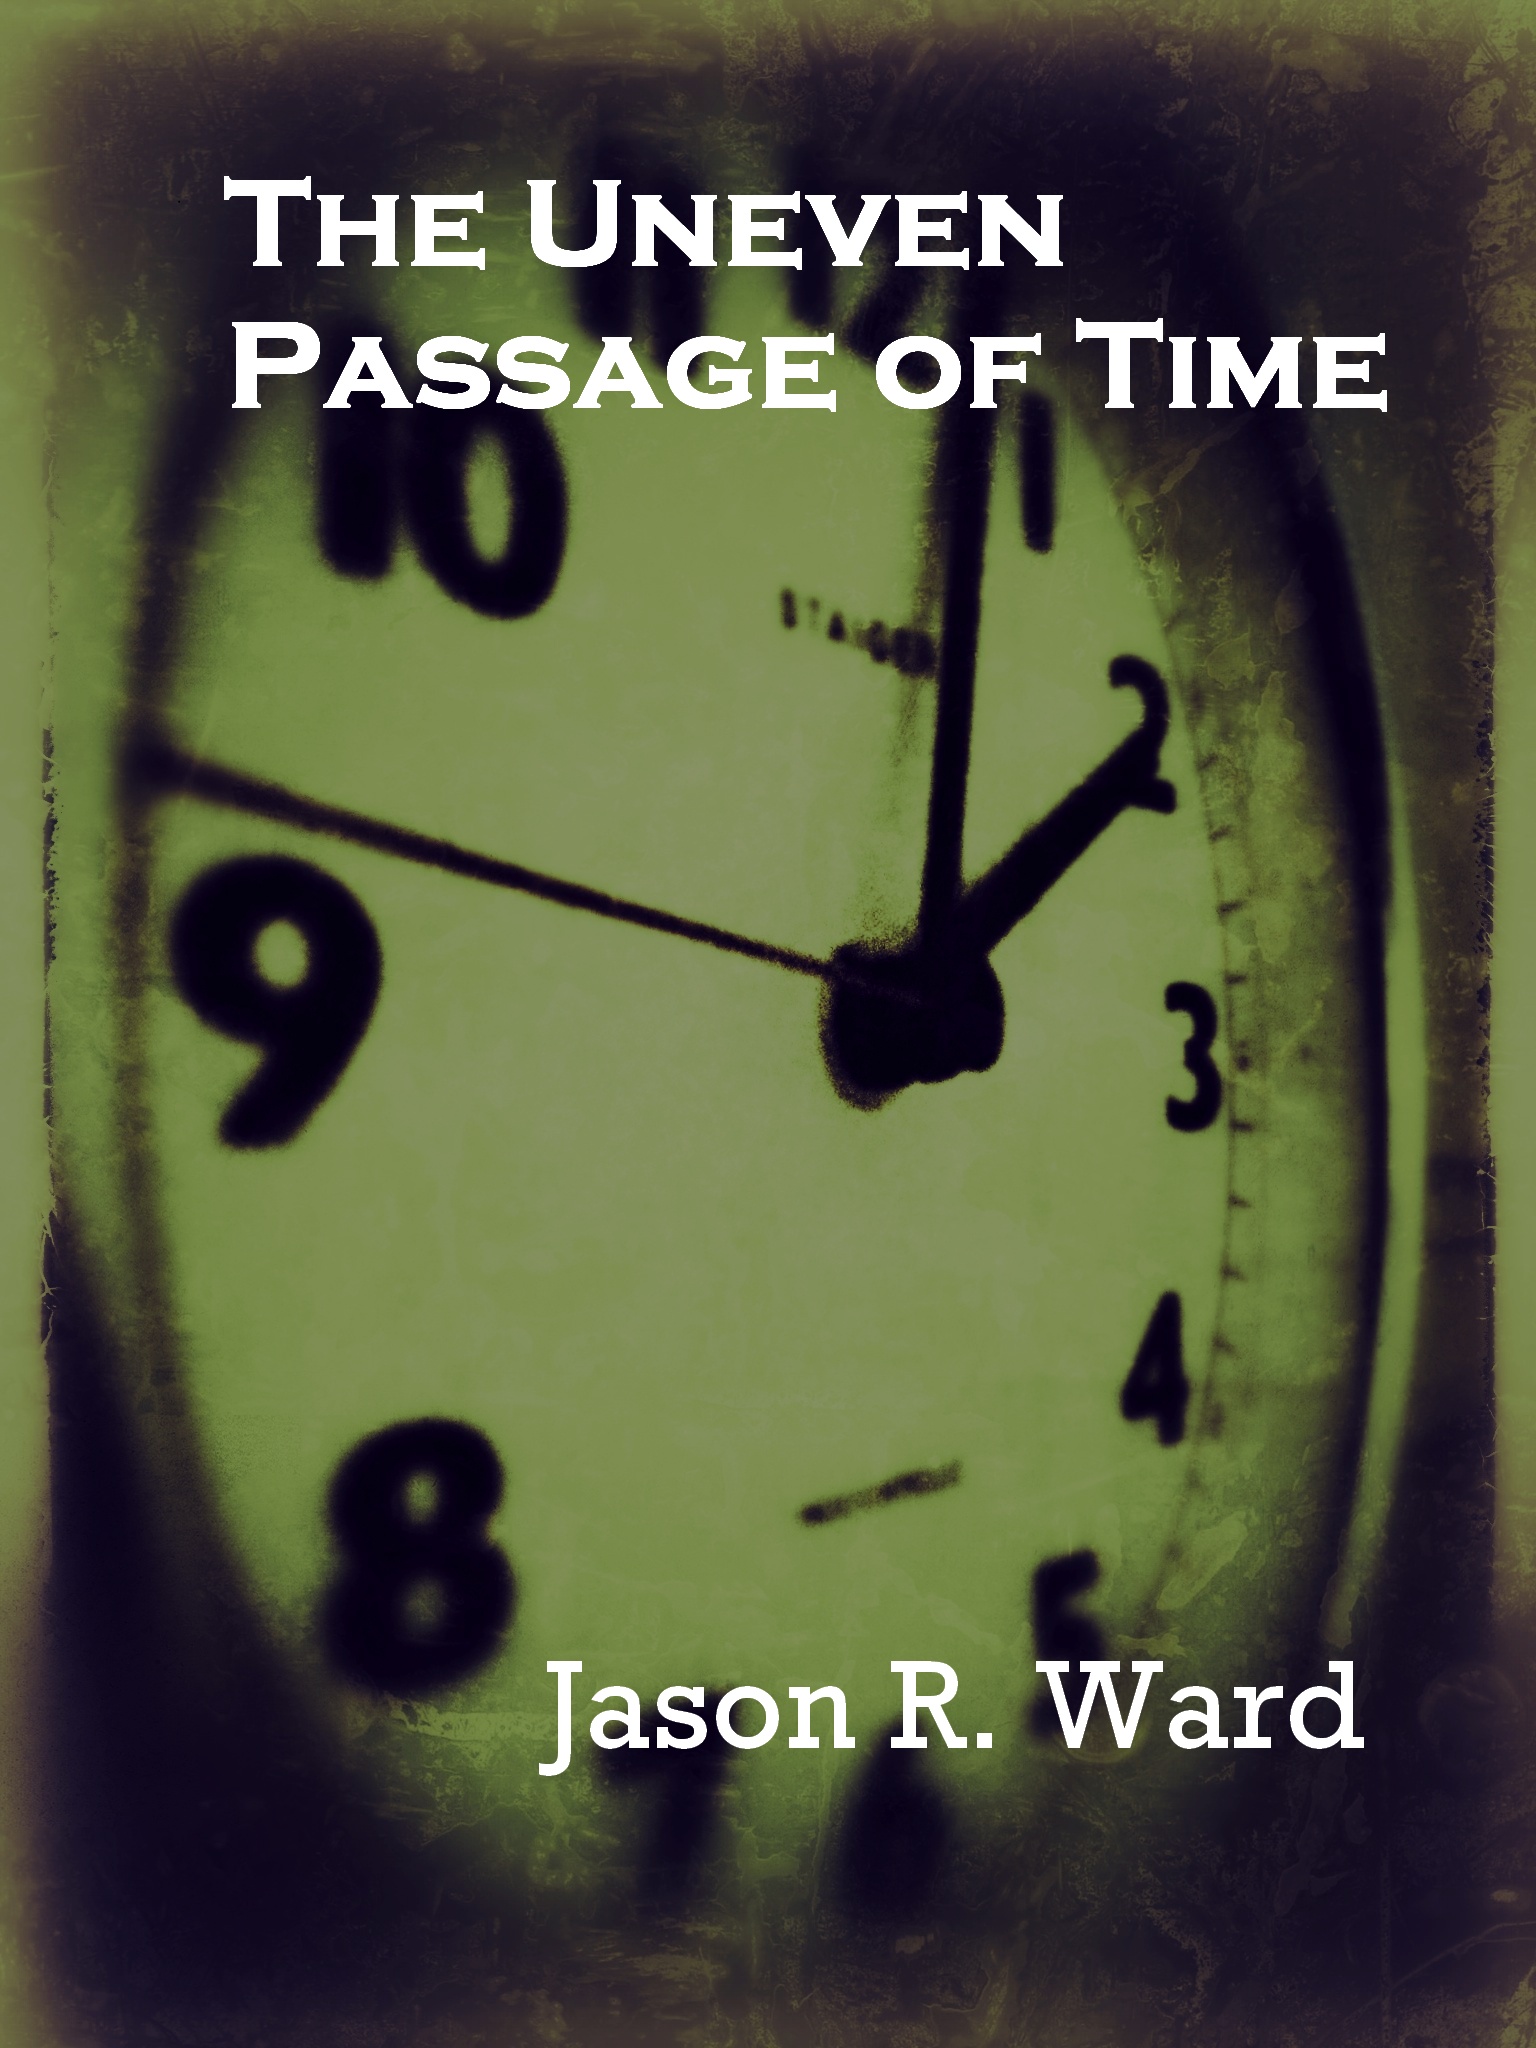 The Uneven Passage of Time